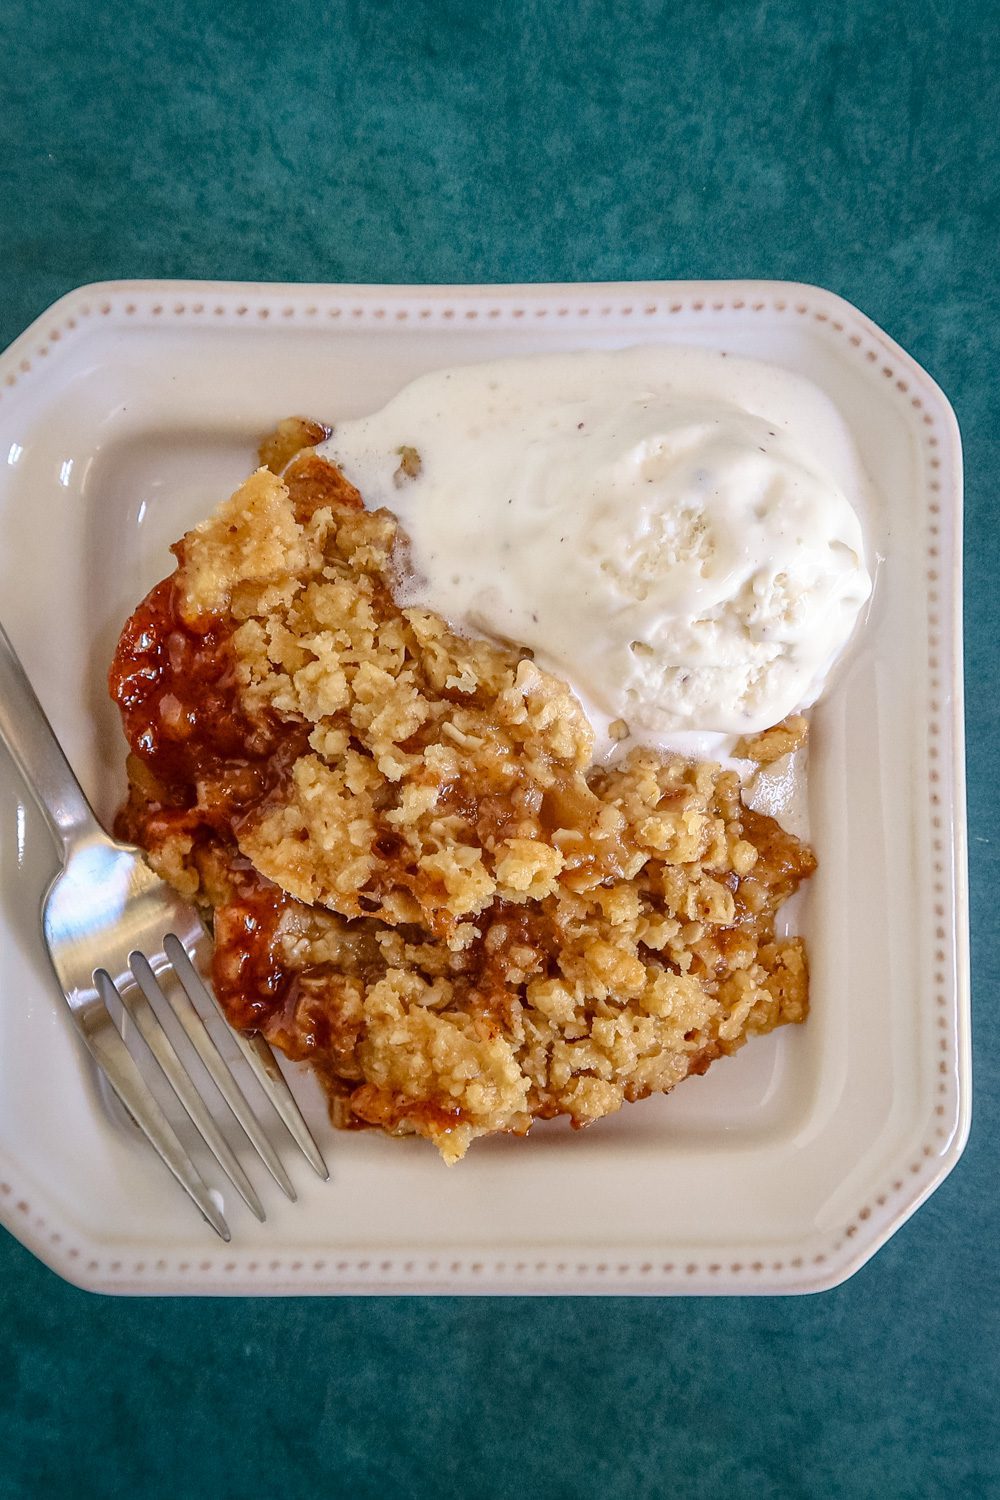 a serving of apple crisp on a plate with ice cream